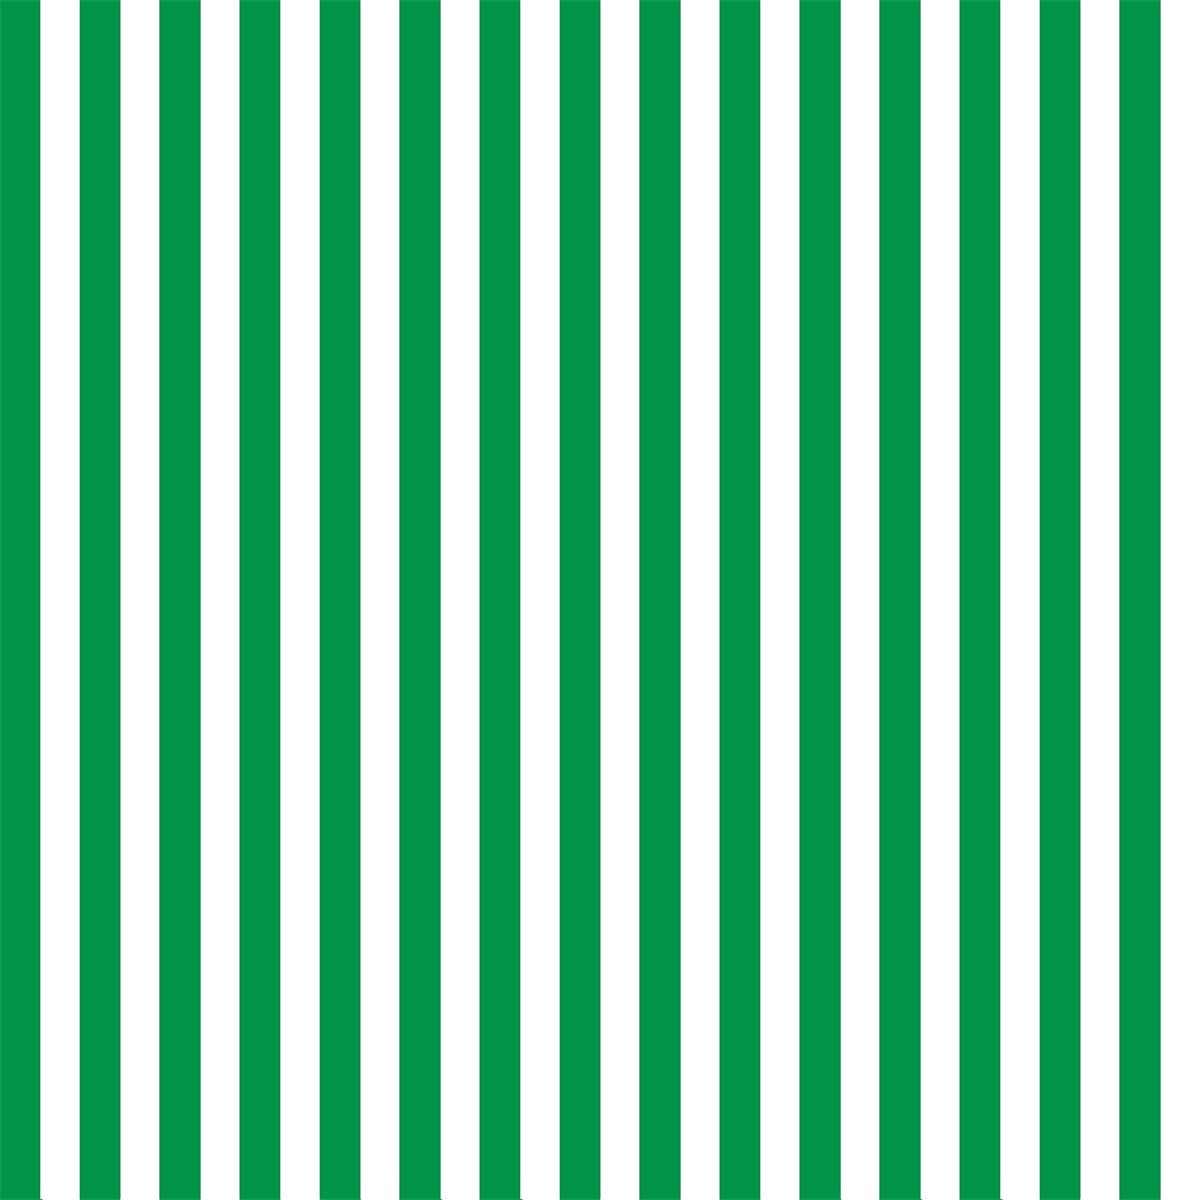 Green and White Stripes Baby Show Photo Backdrops